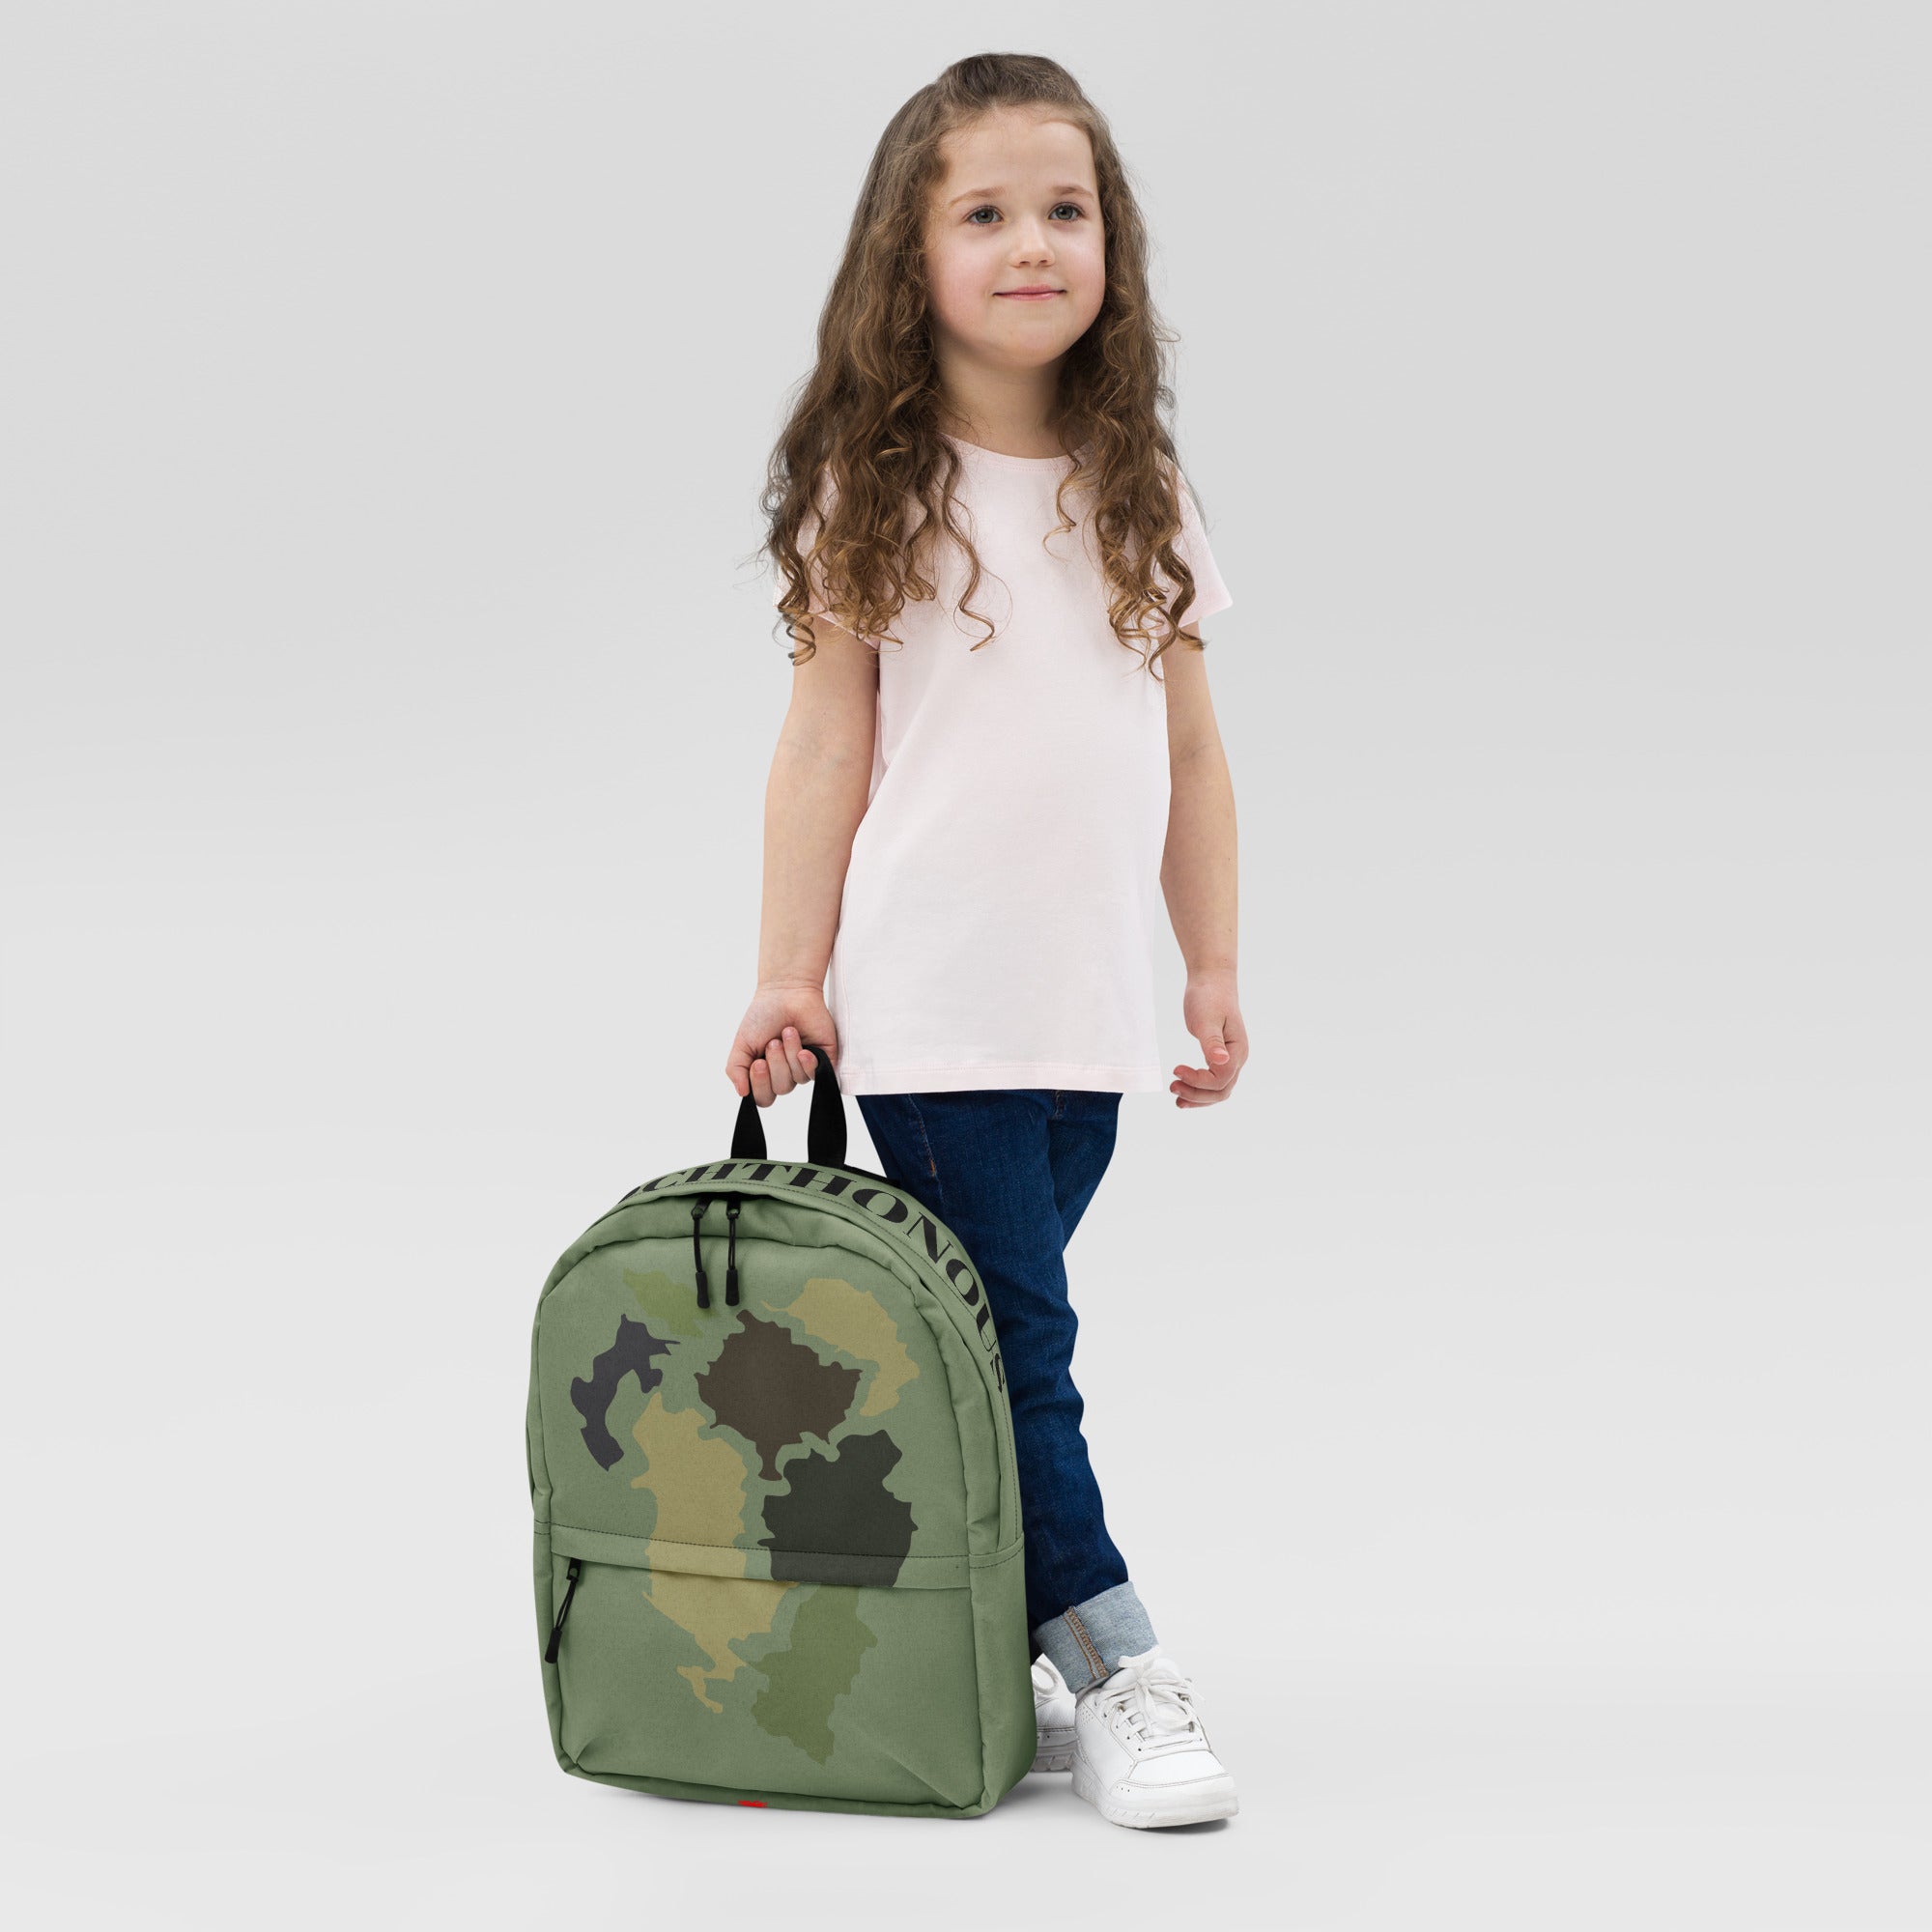 Back to school Autochthonous Albania Backpack | School bag | Great Albania map